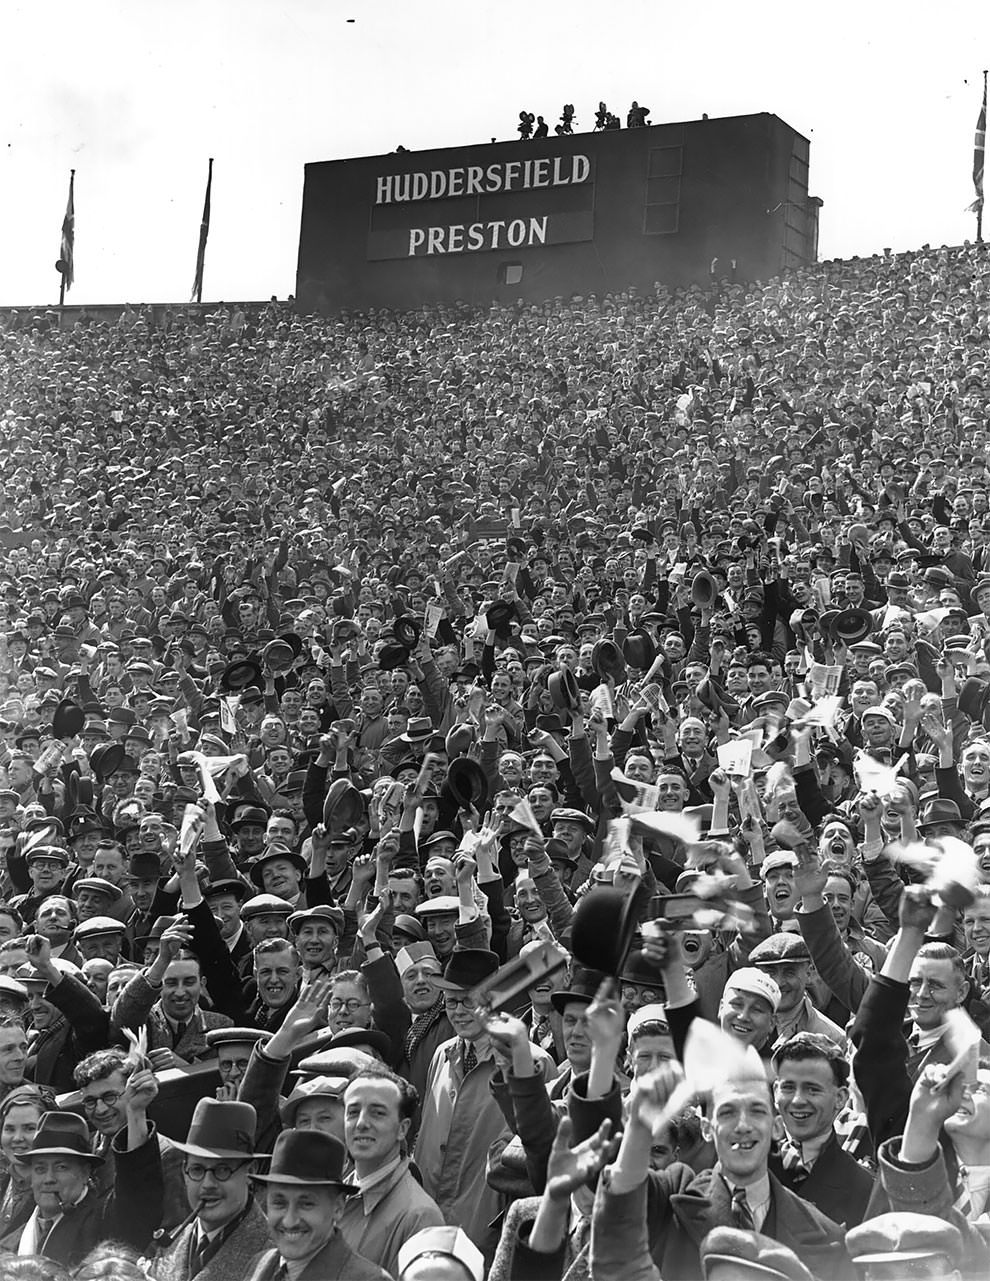 Crowds of supporters fill the stands at Wembley Stadium for the FA Cup Final between Preston North End and Huddersfield Town. Preston won 1-0 after extra time, 30th April 1938